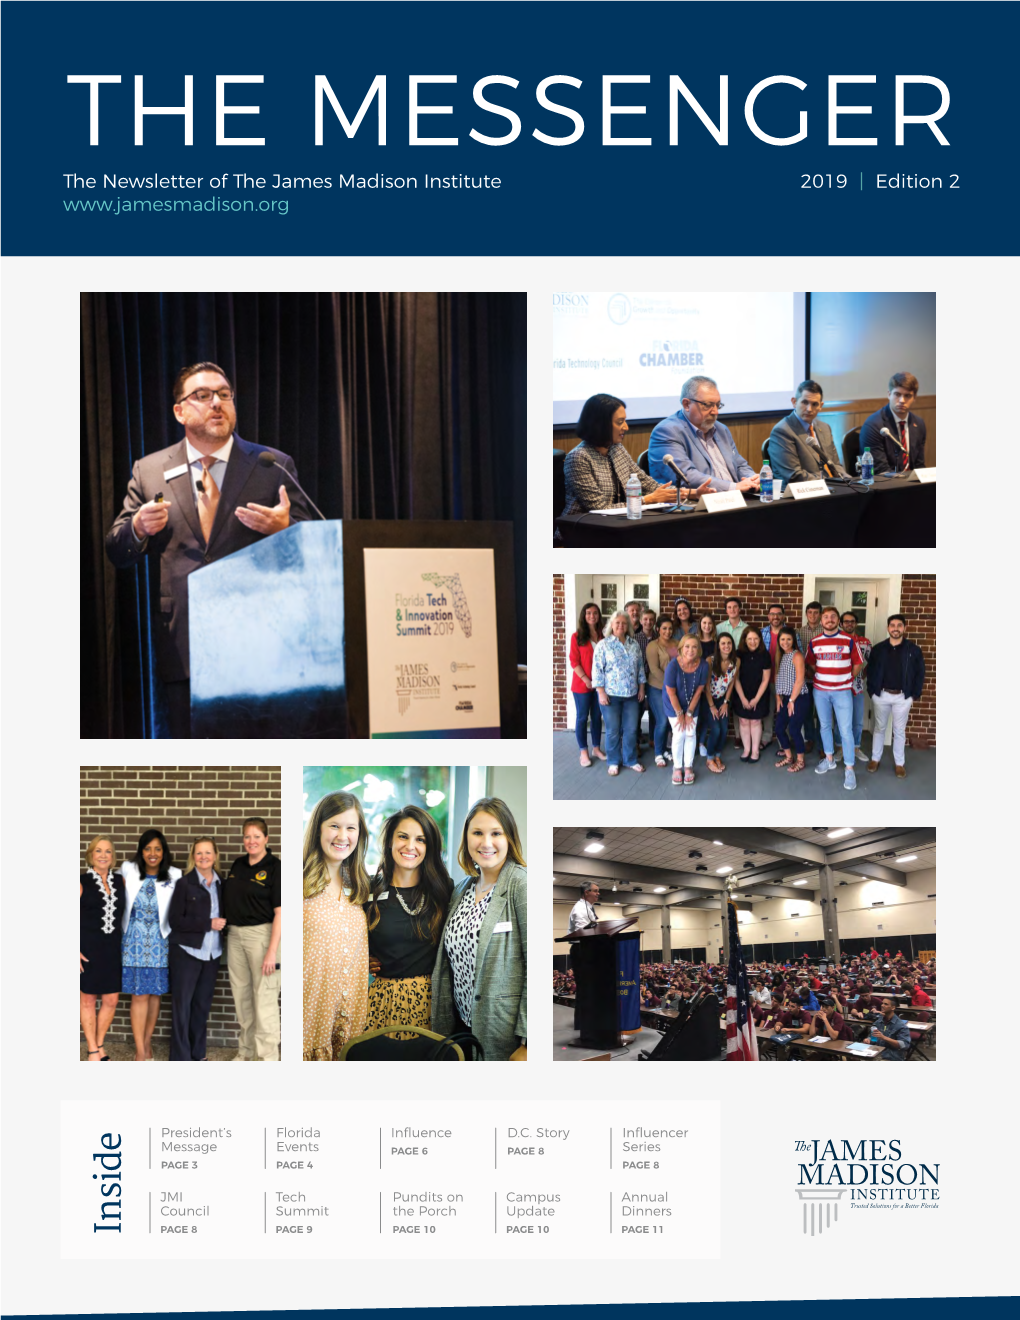 THE MESSENGER the Newsletter of the James Madison Institute 2019 | Edition 2